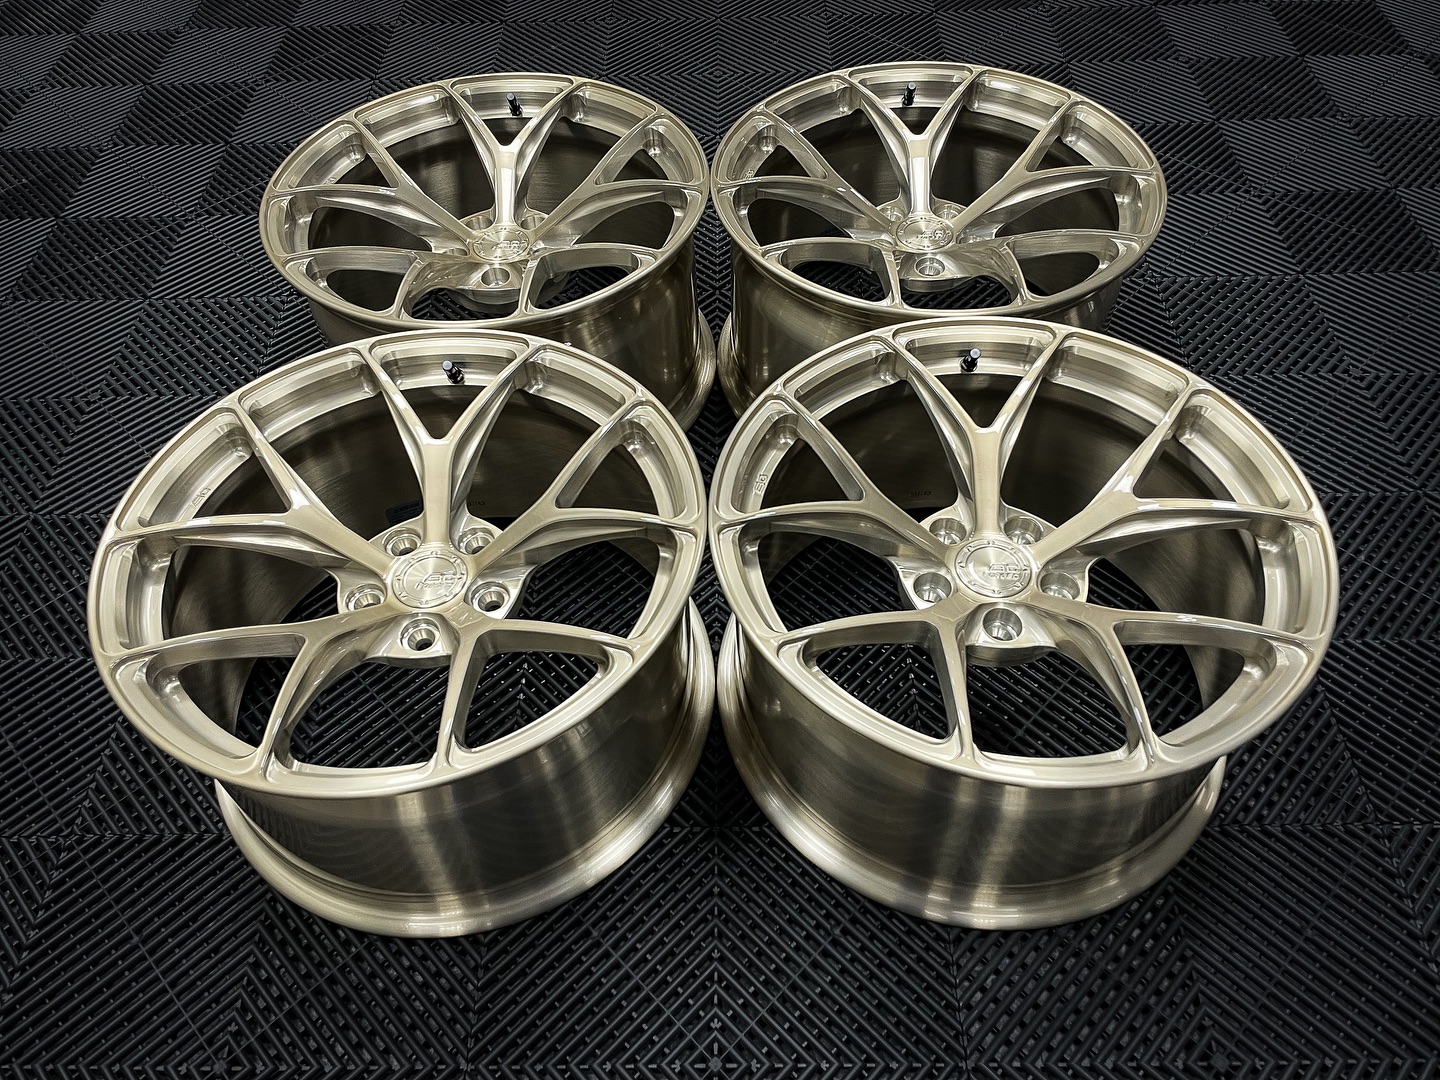 S650 Mustang Authorized Dealer BC Forged Wheels: Monoblock And Modular Series Wheels For Mustang S650 418727876_18394909720064104_4351390399387840024_n